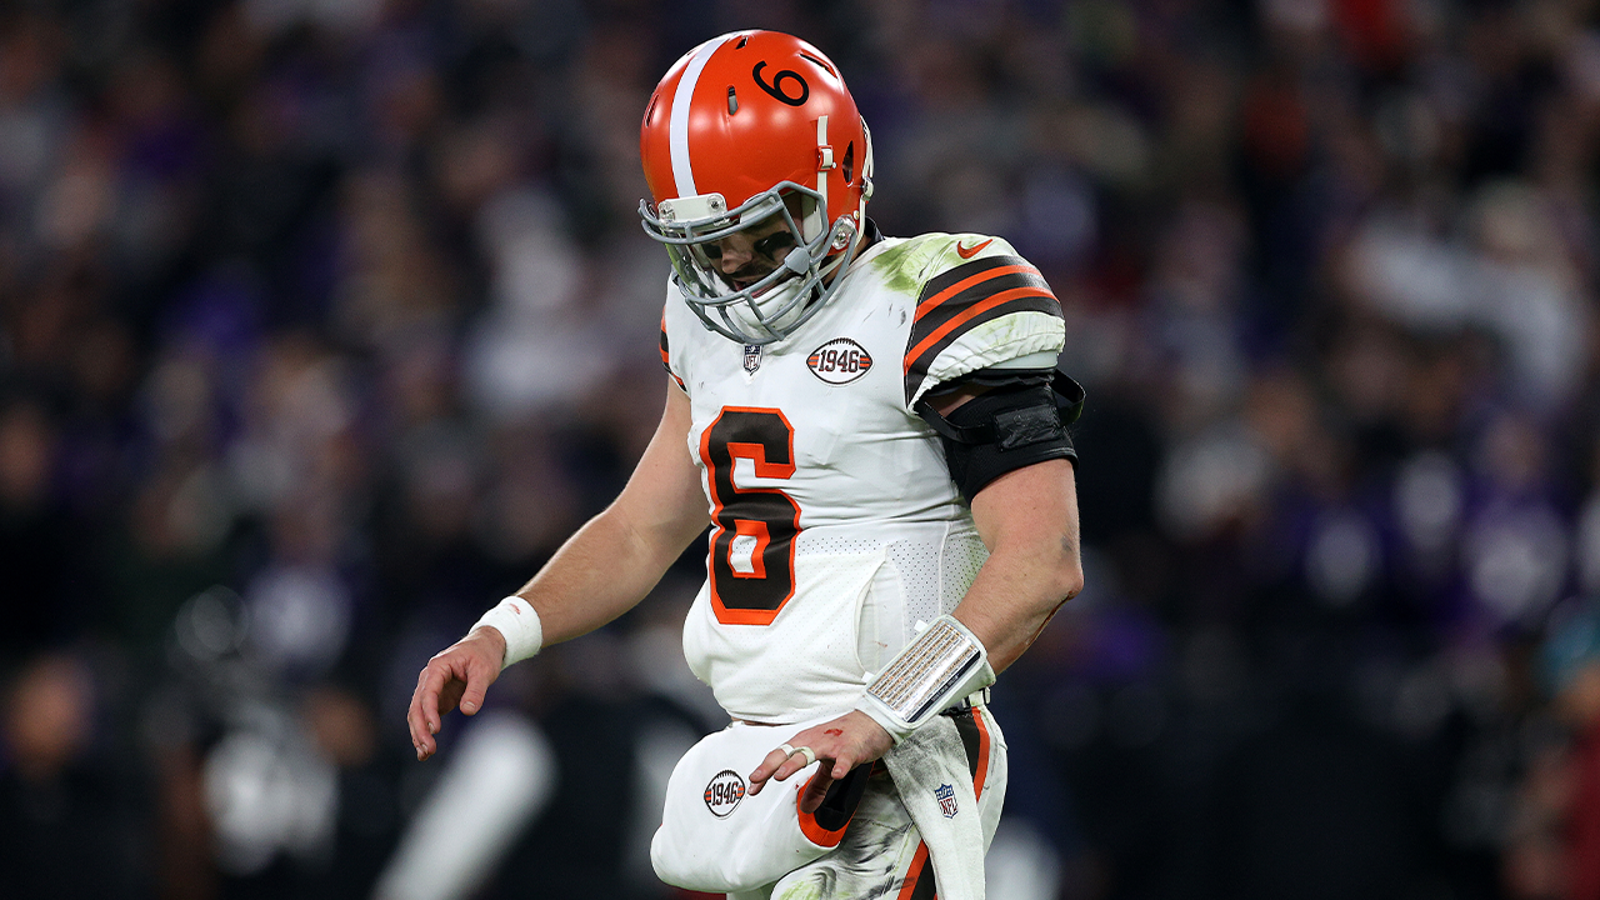 "He's not the guy in my book" — Terry Bradshaw and the FOX NFL Sunday crew assess Baker Mayfield's future in Cleveland